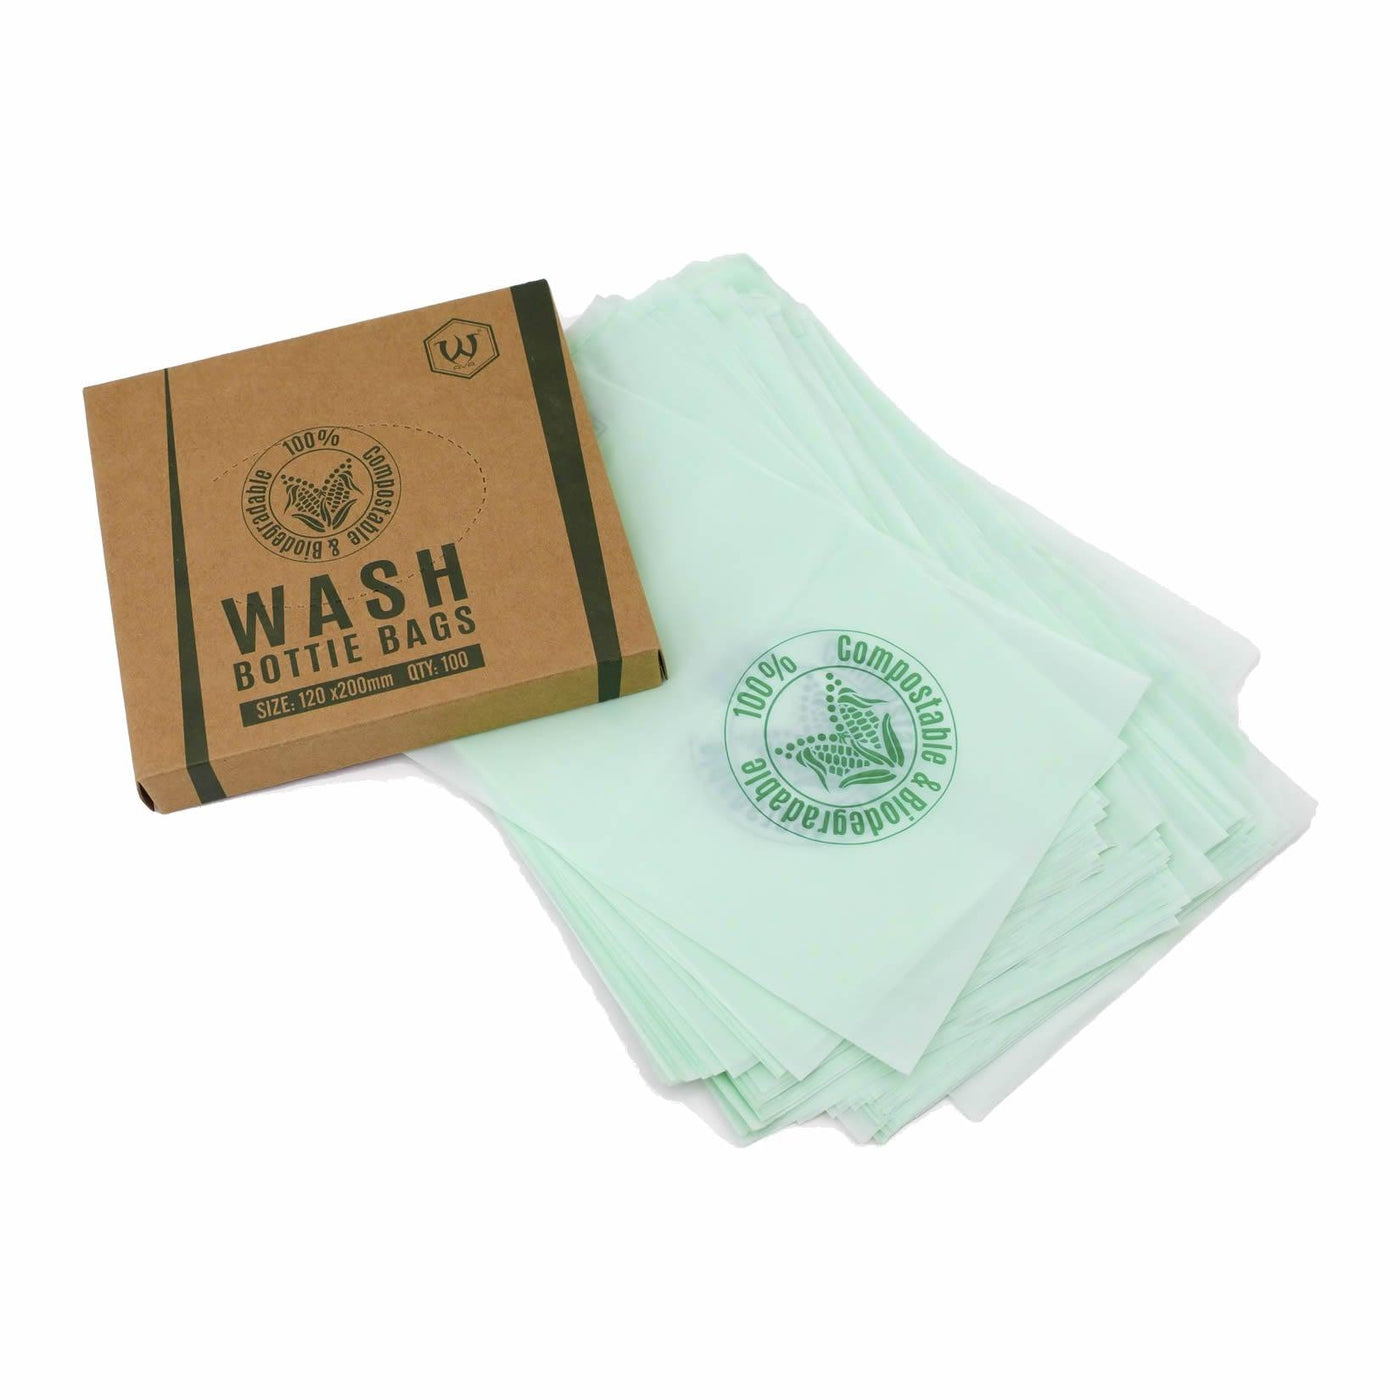 Biodegradable Wash Bottle Bags - Maple Tattoo Supply